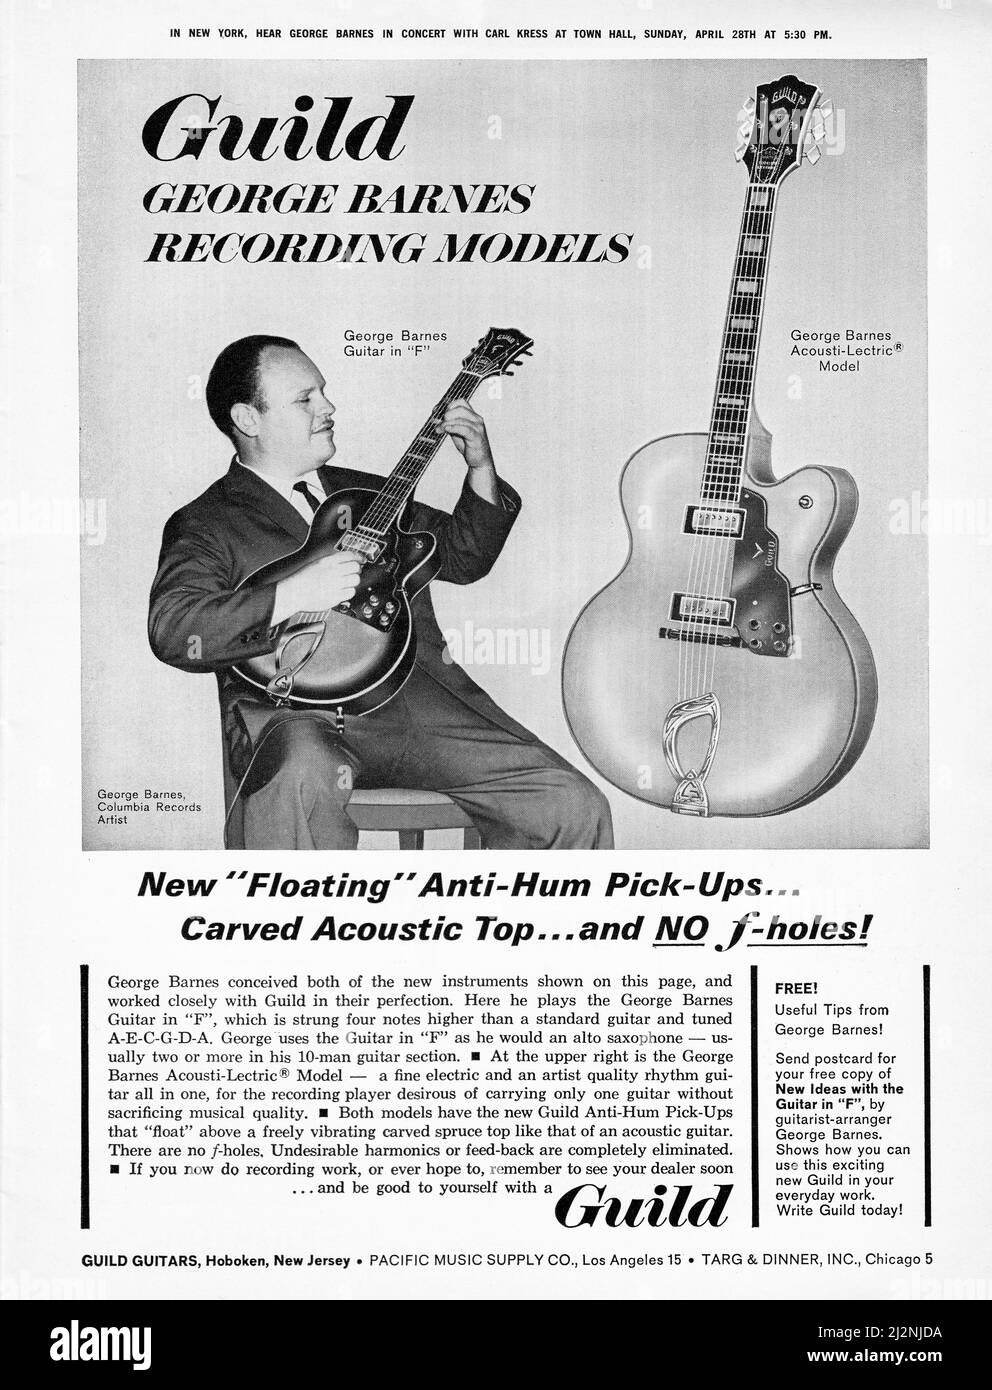 An ad for Guild guitars and their acoustic electric model.It features legendary swing guitarist George Barnes. From a 1969 American music magazine. He was one of the first to record on electric guitar Stock Photo